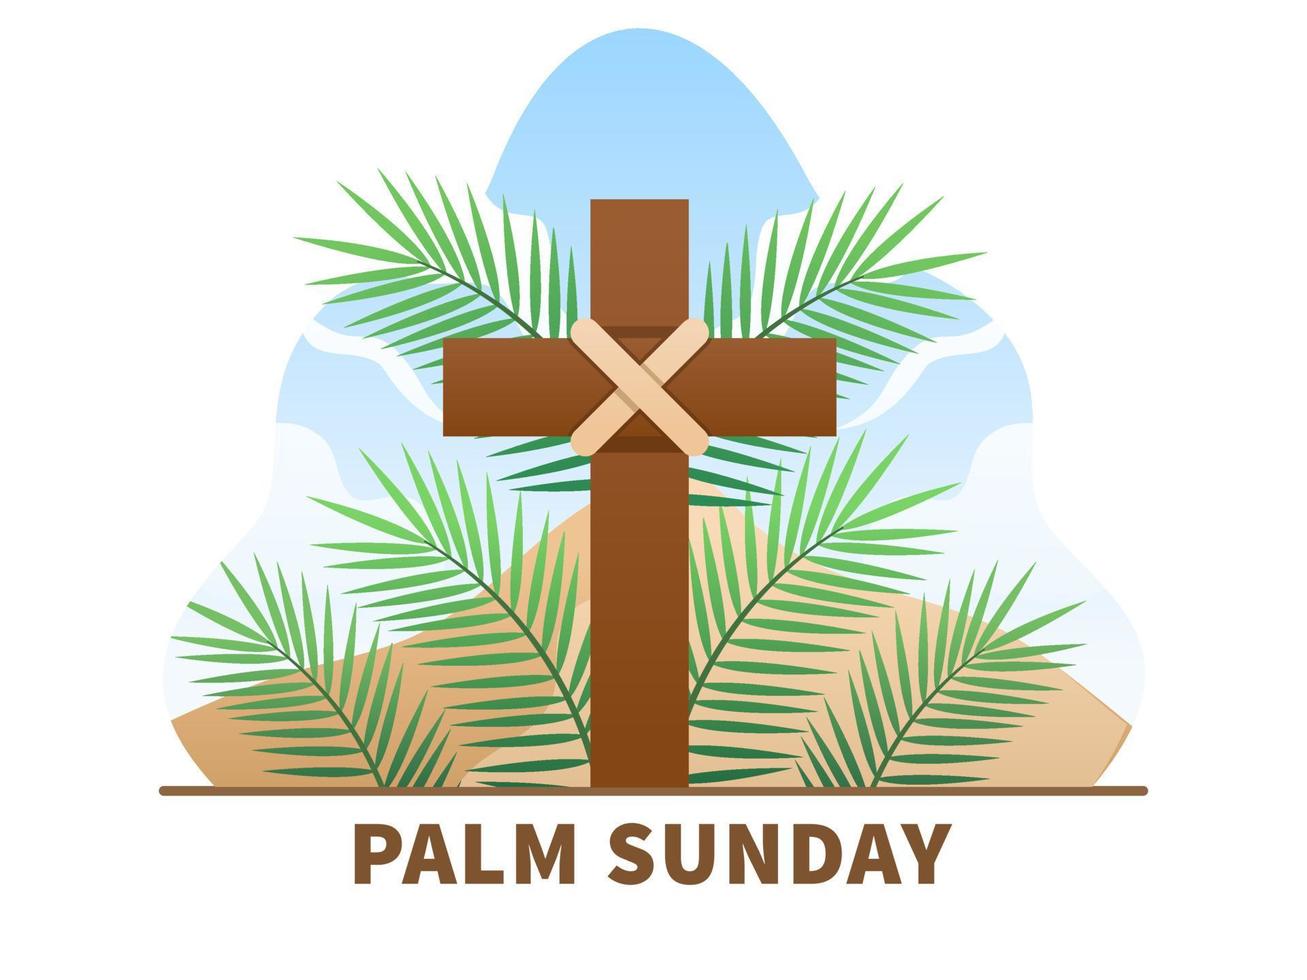 Christian Palm Sunday religious holiday with palm leaves and cross illustration vector. Can be used for greeting card, postcard, banner, poster, web, social media, print, book, etc vector